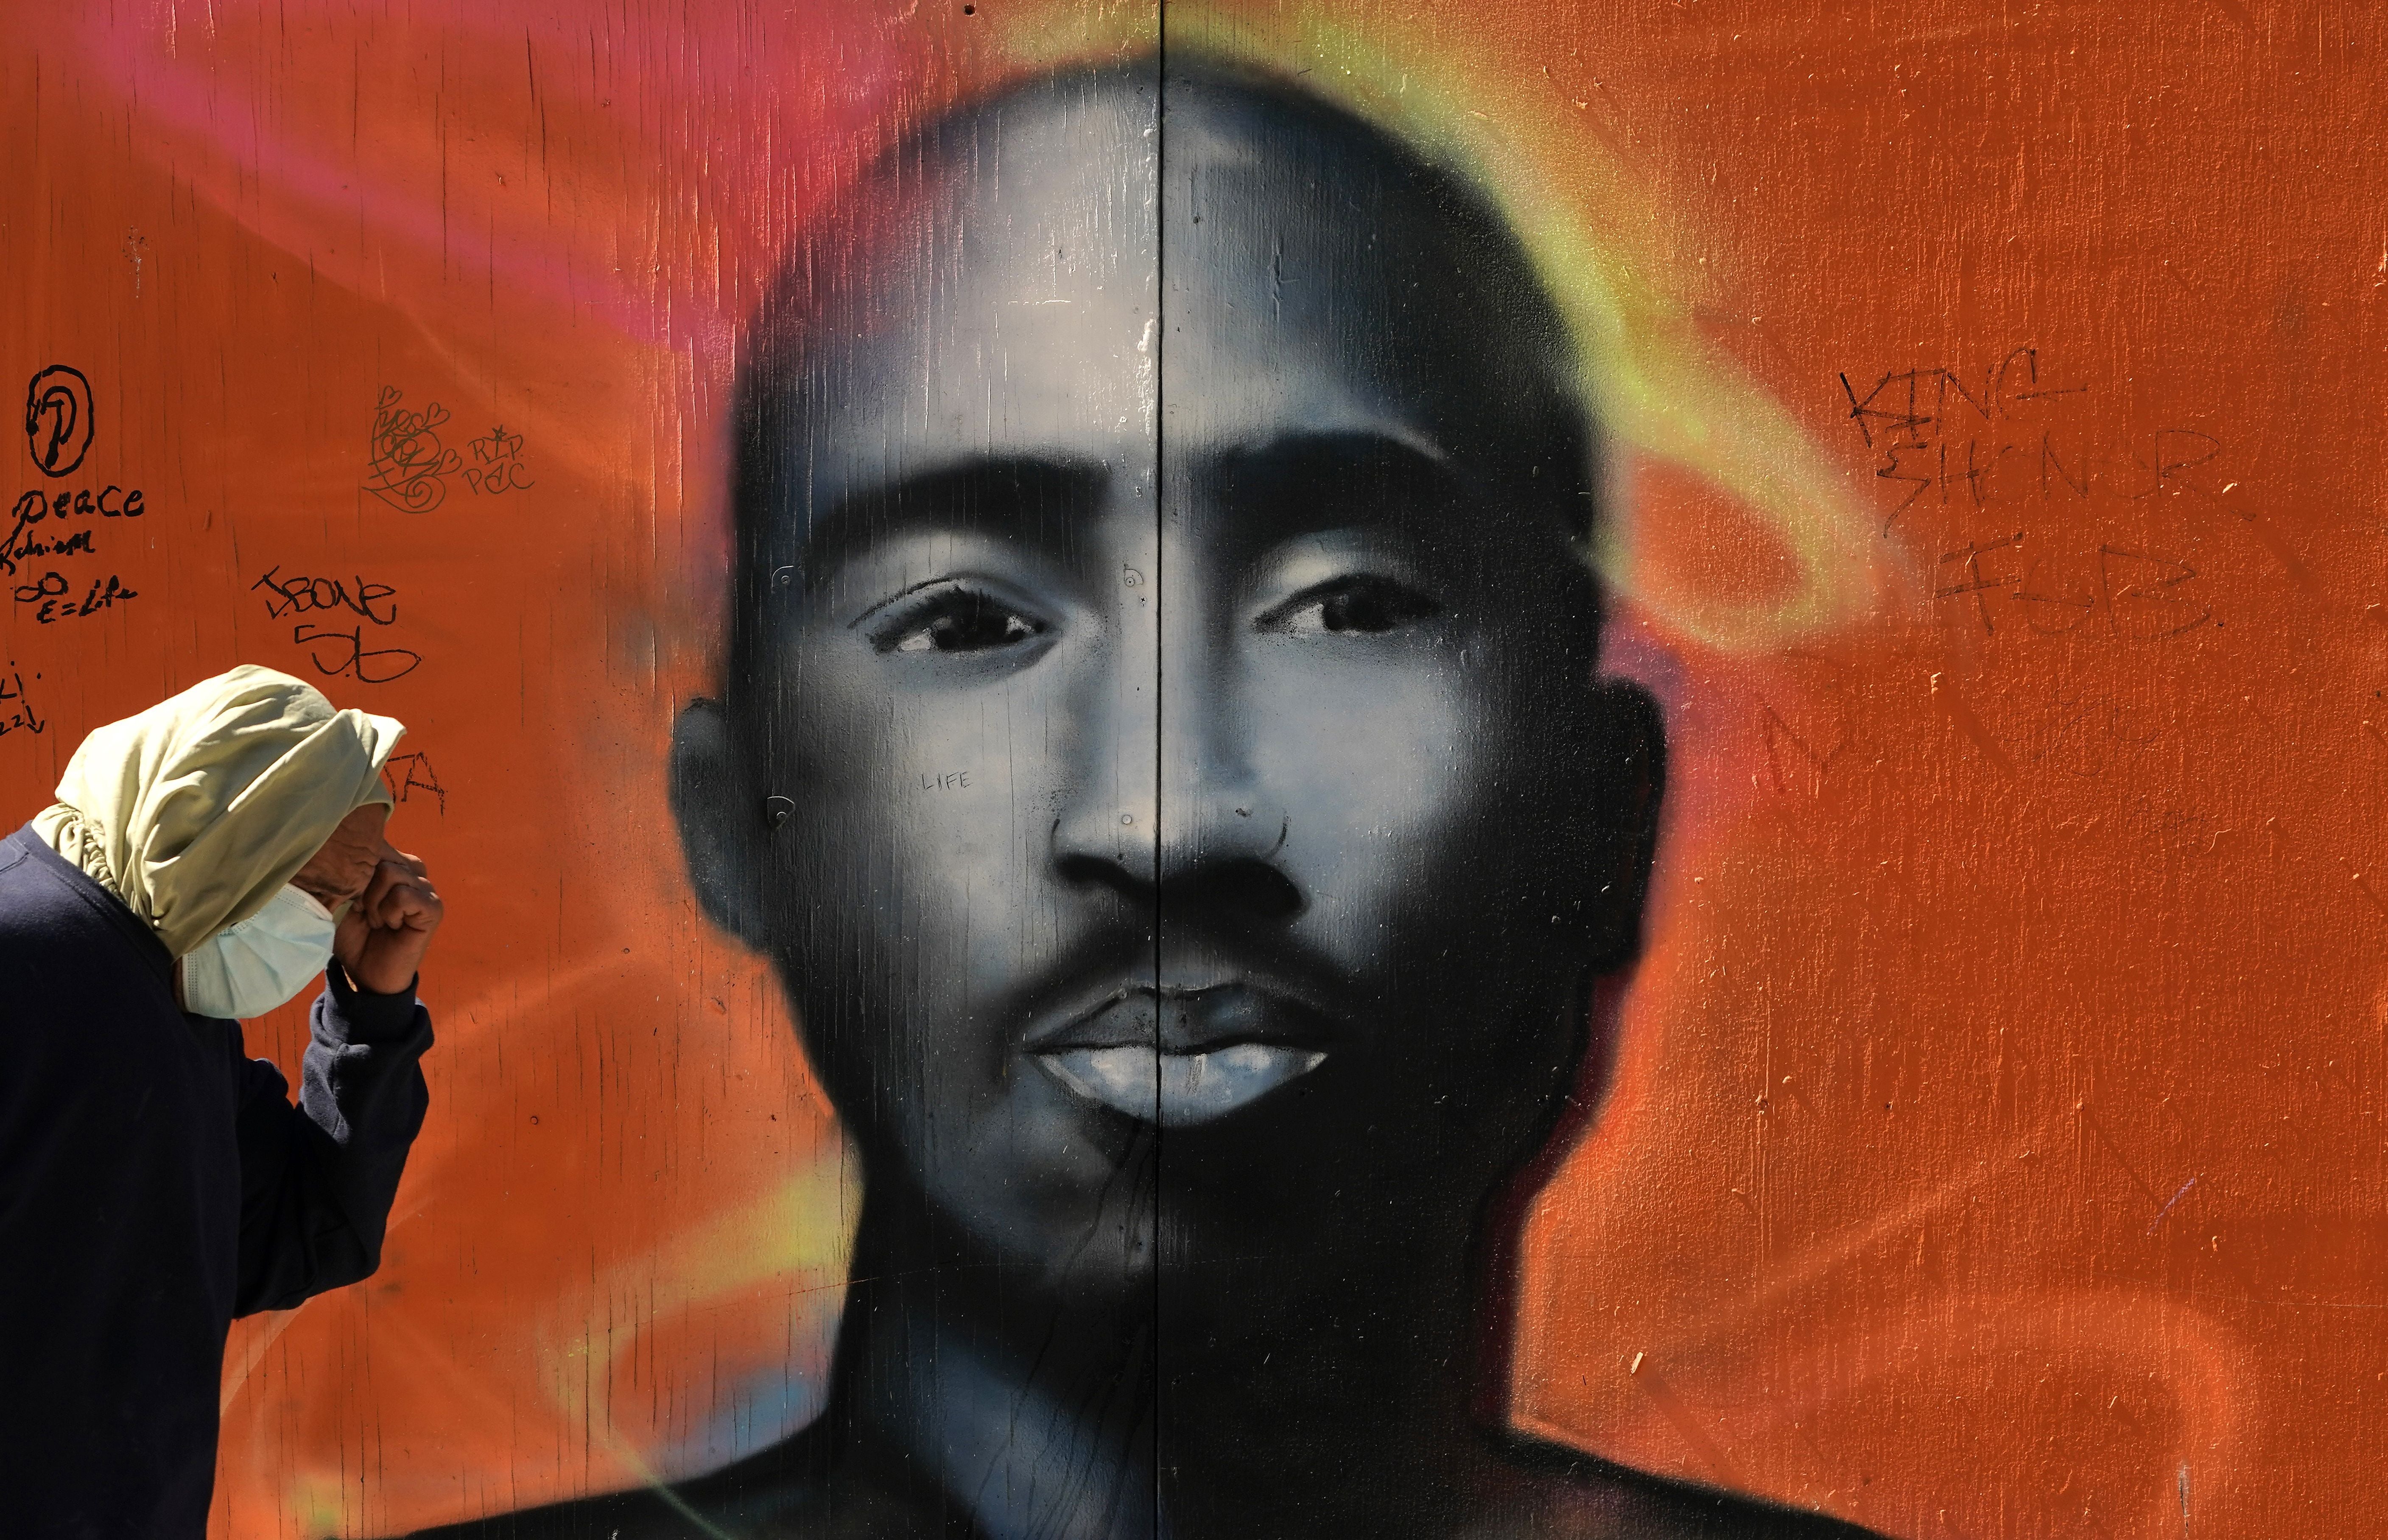 A mural of the late rapper Tupac Shakur in the Harlem area of New York City